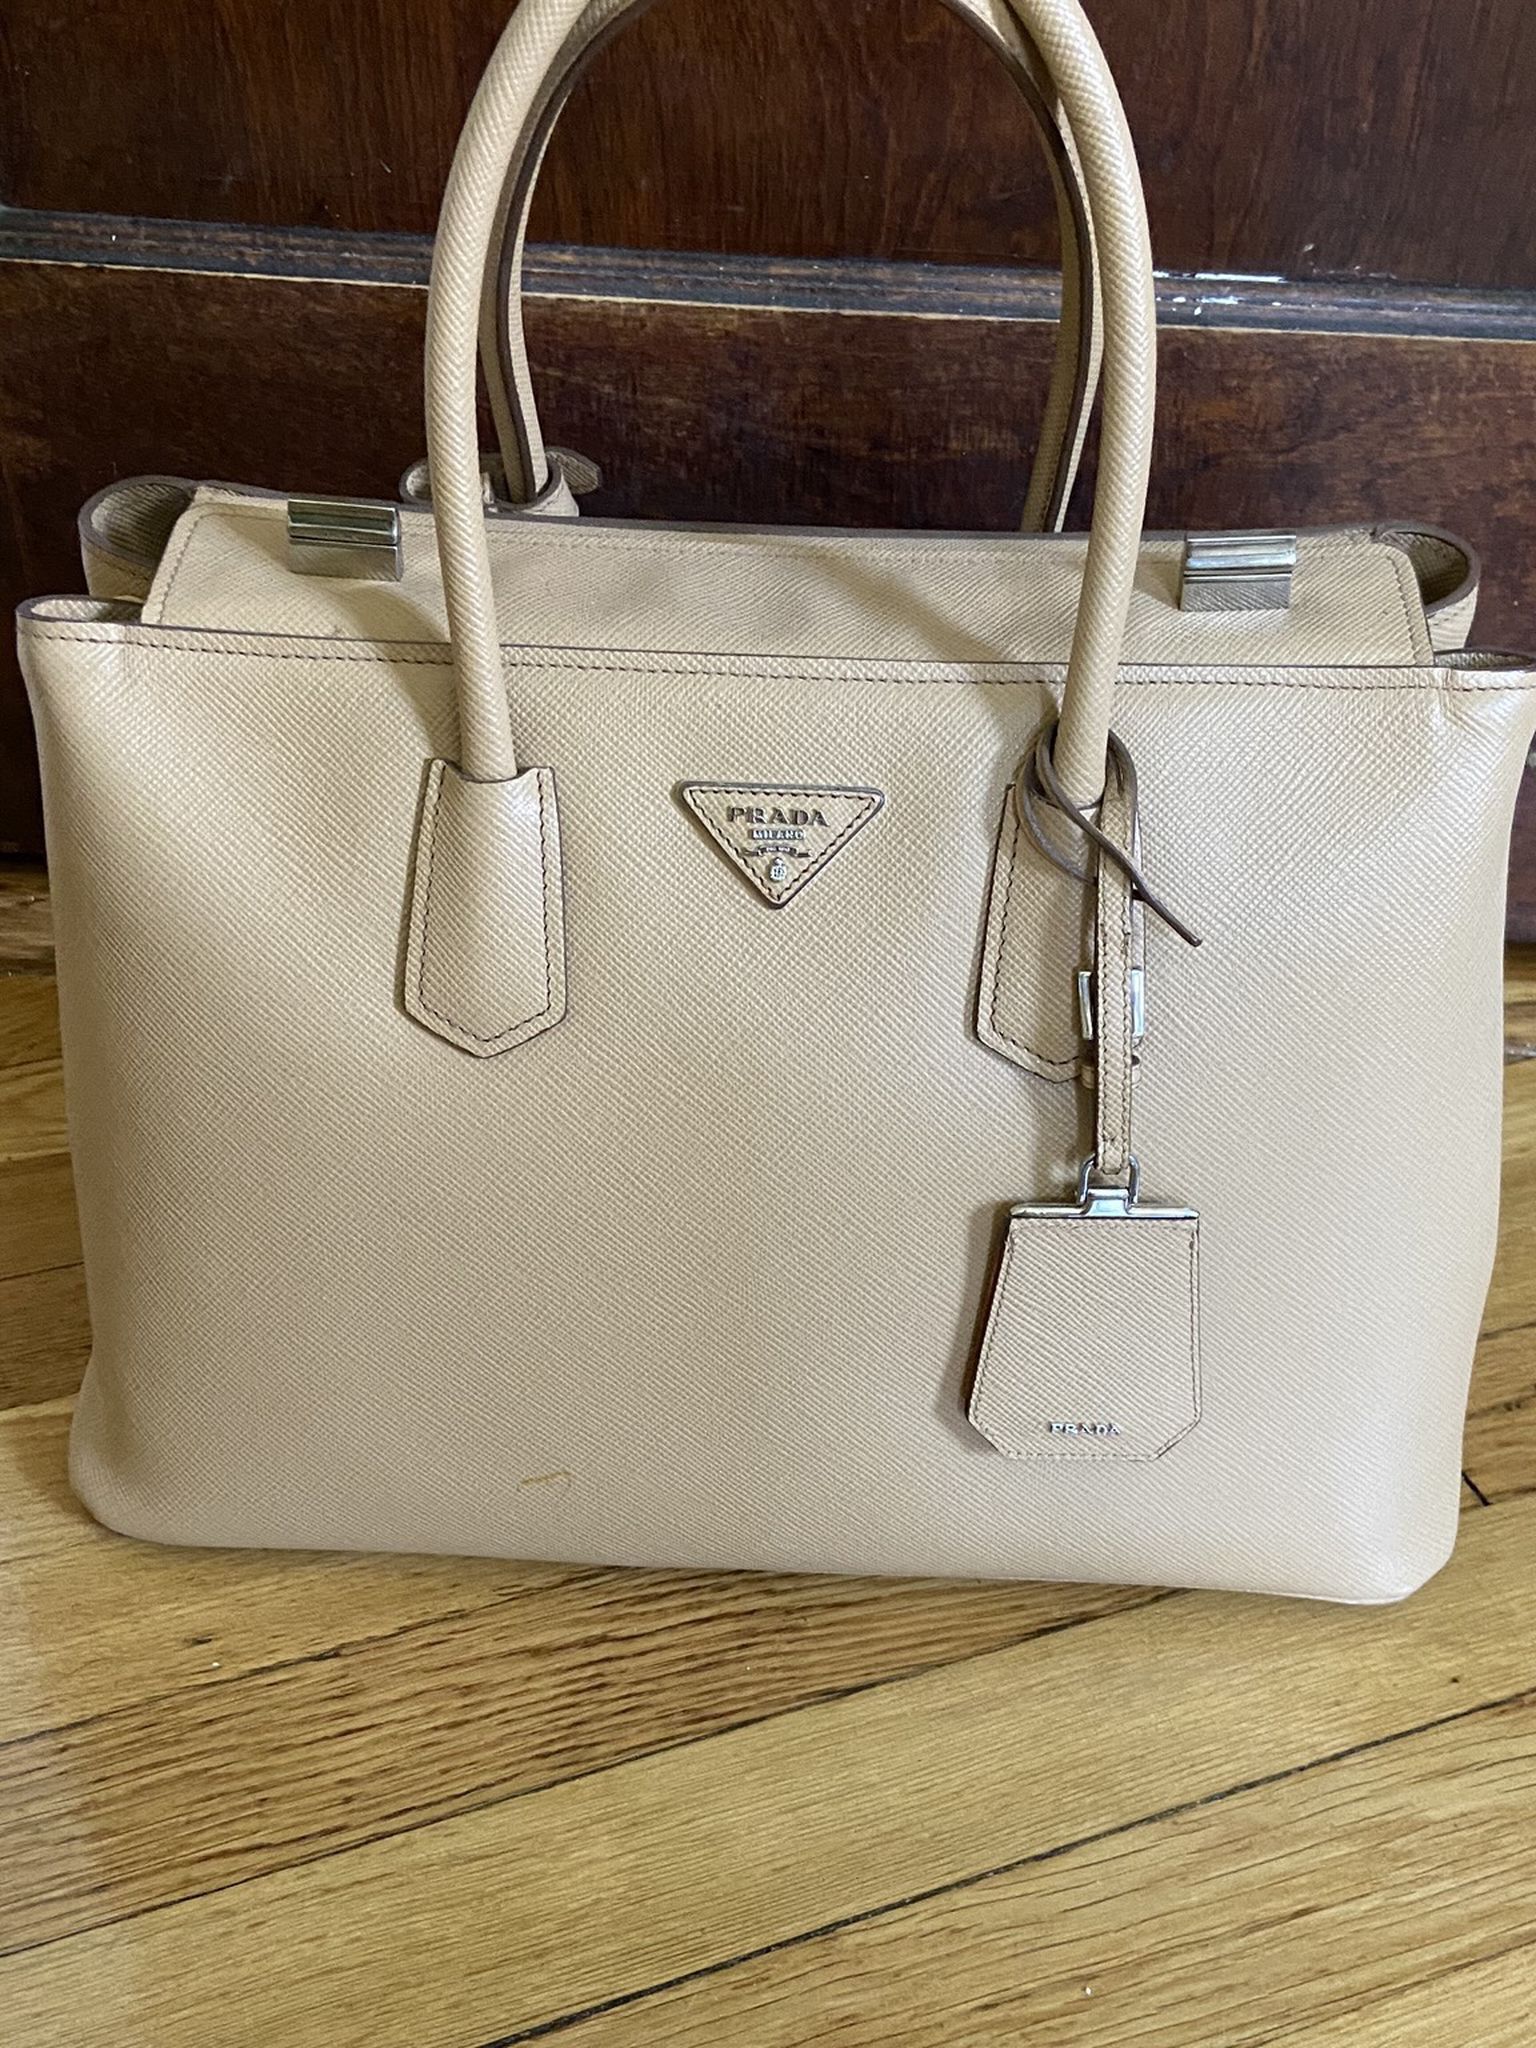 Excellent Condition Prada Bag With Authentification Certificate